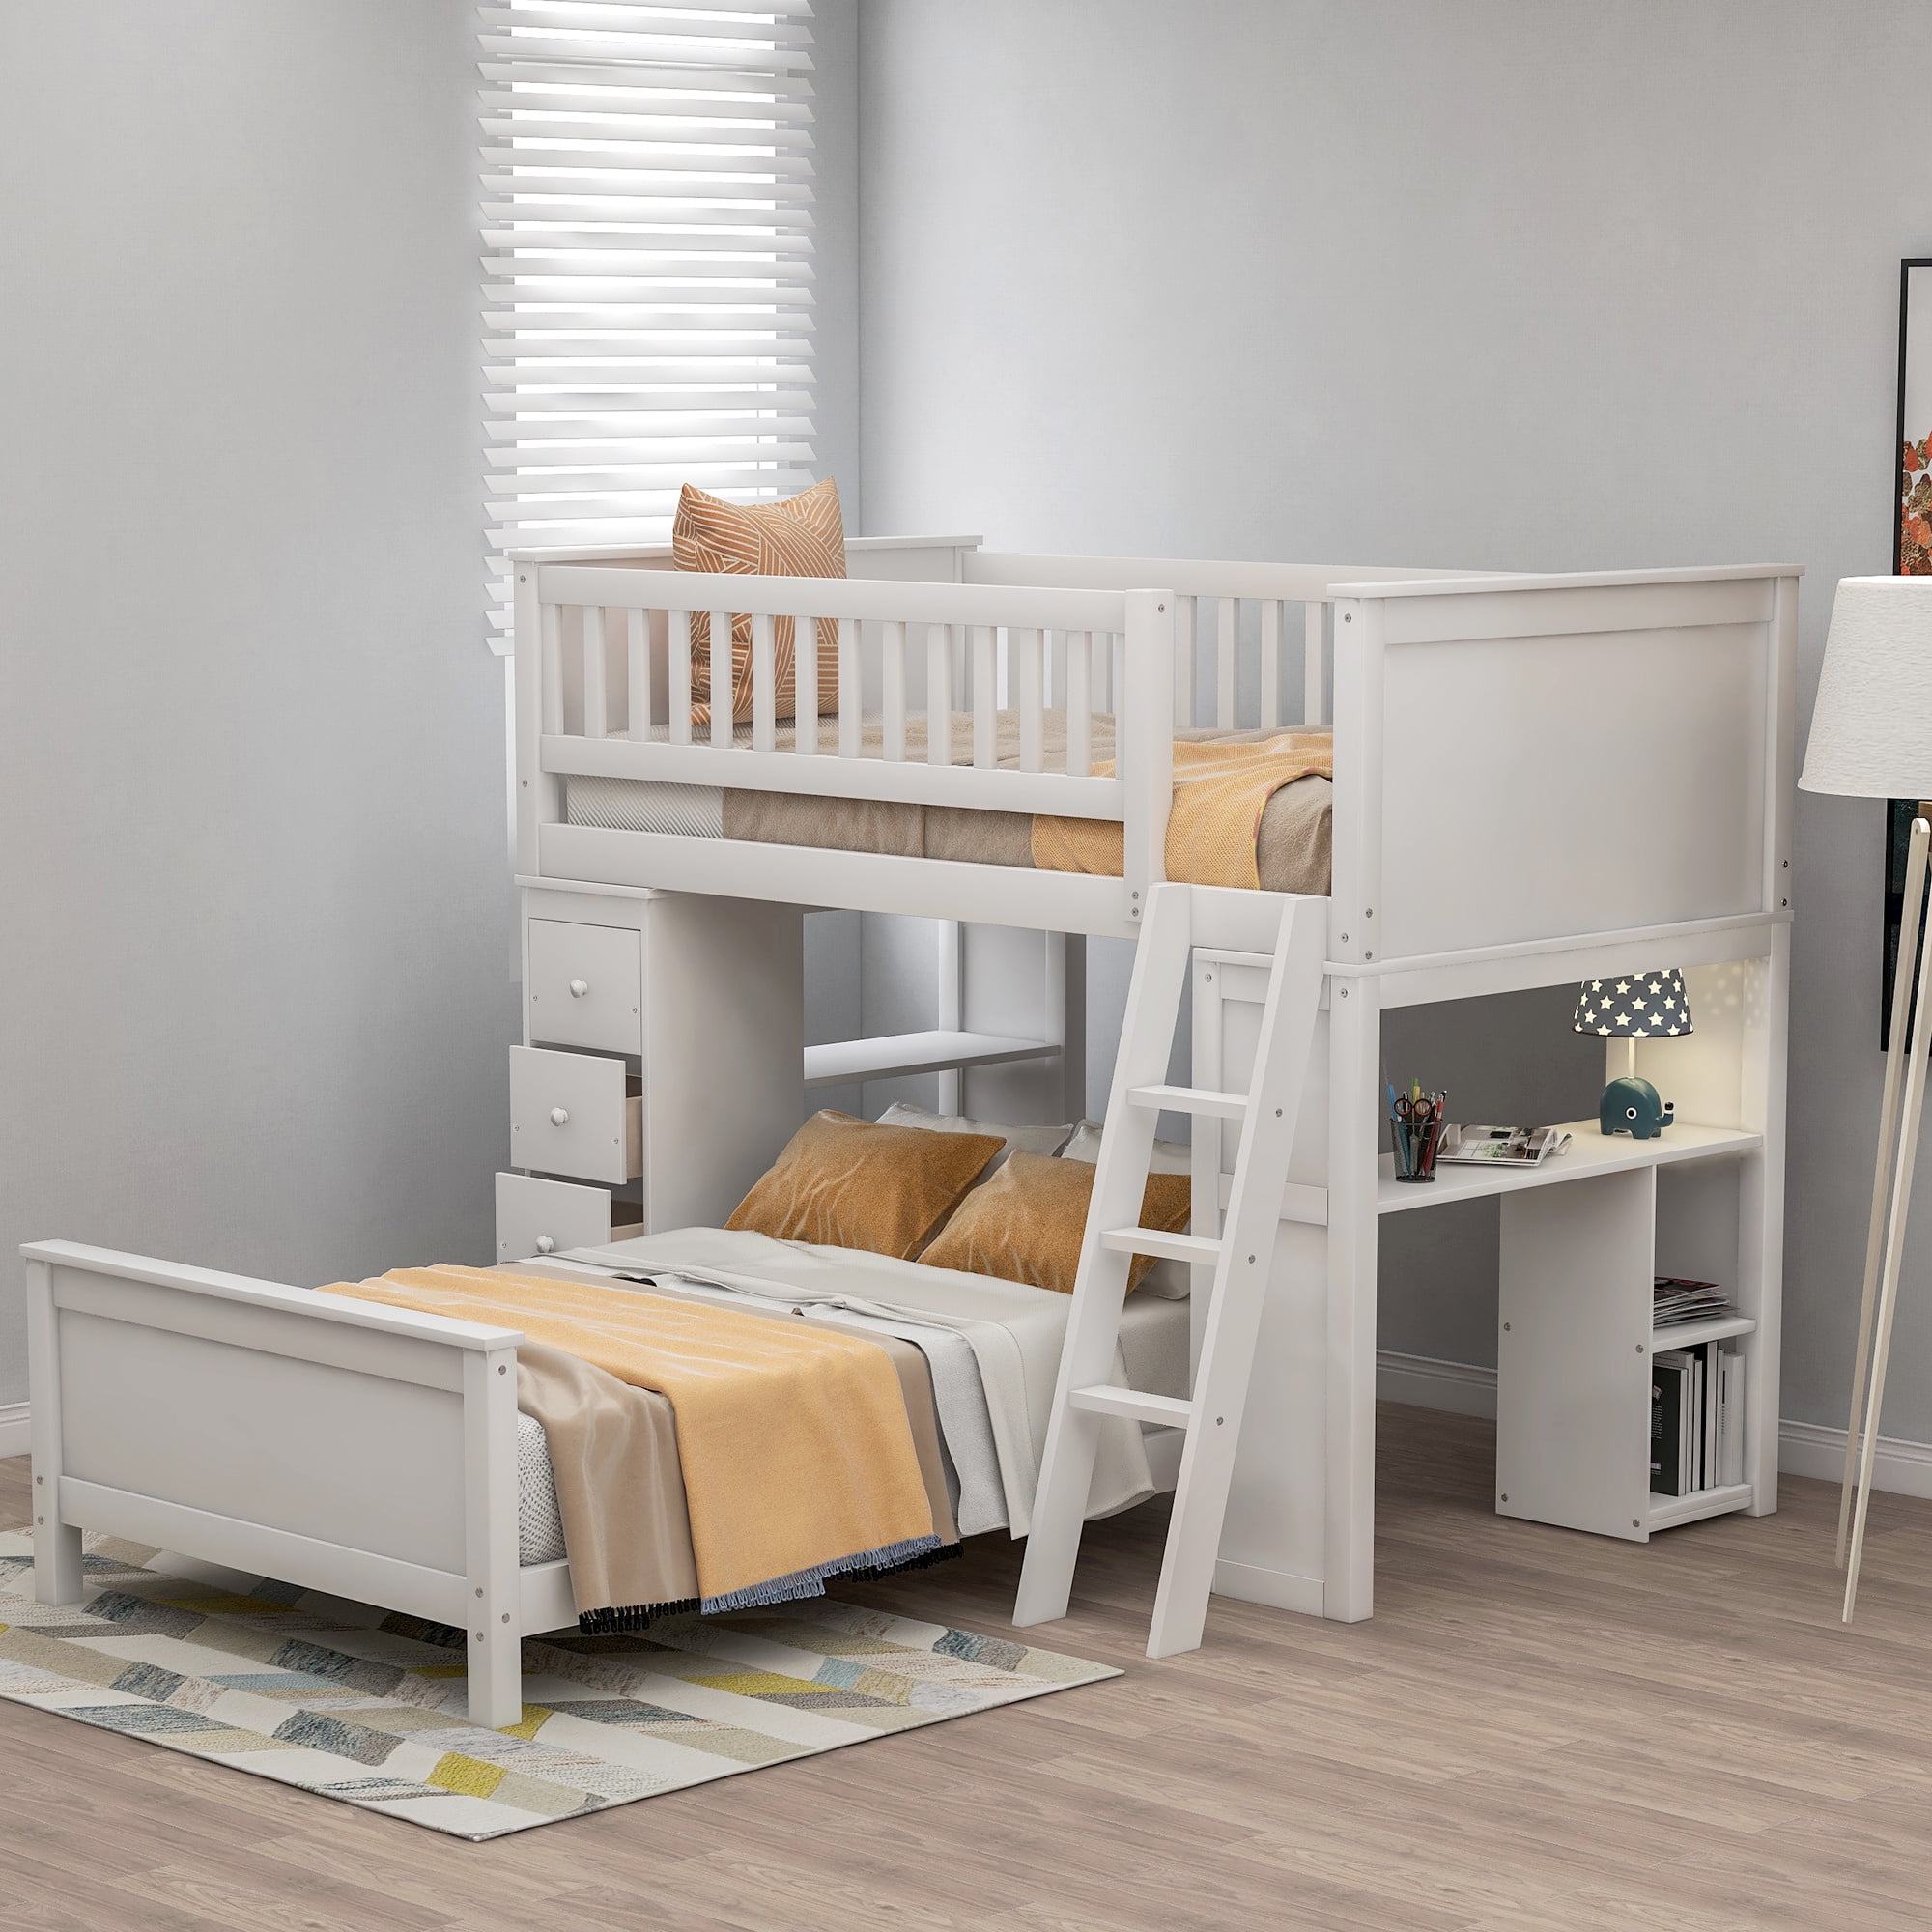 L Shaped Bunk Bed Twin Loft, Full Over L Shaped Bunk Bed With Desk And Drawer